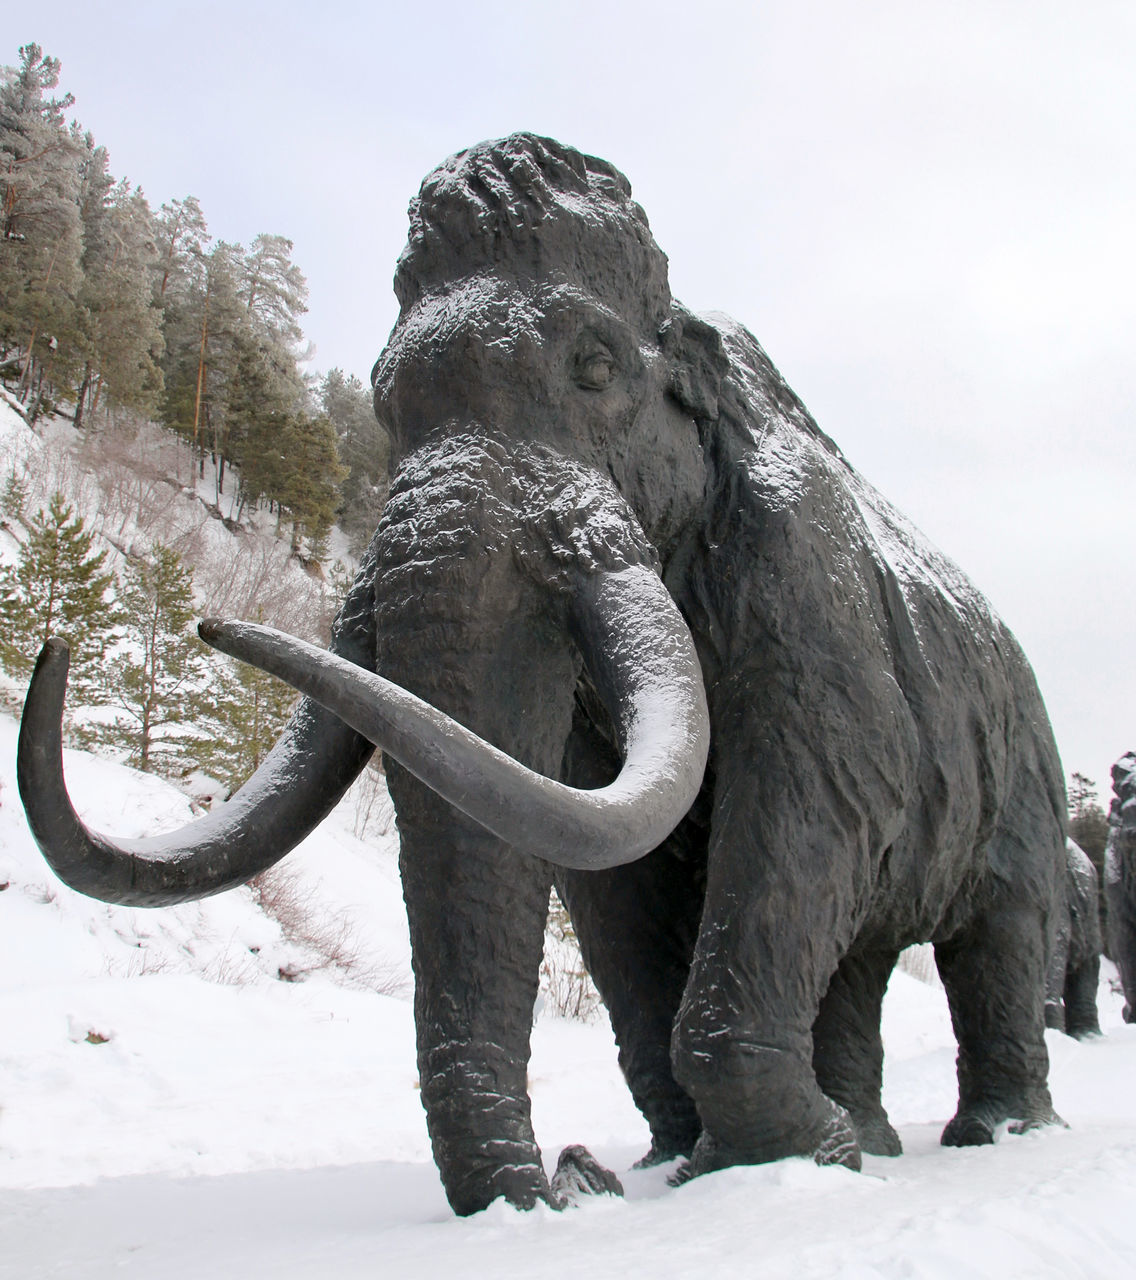 VIEW OF ELEPHANT IN SNOW